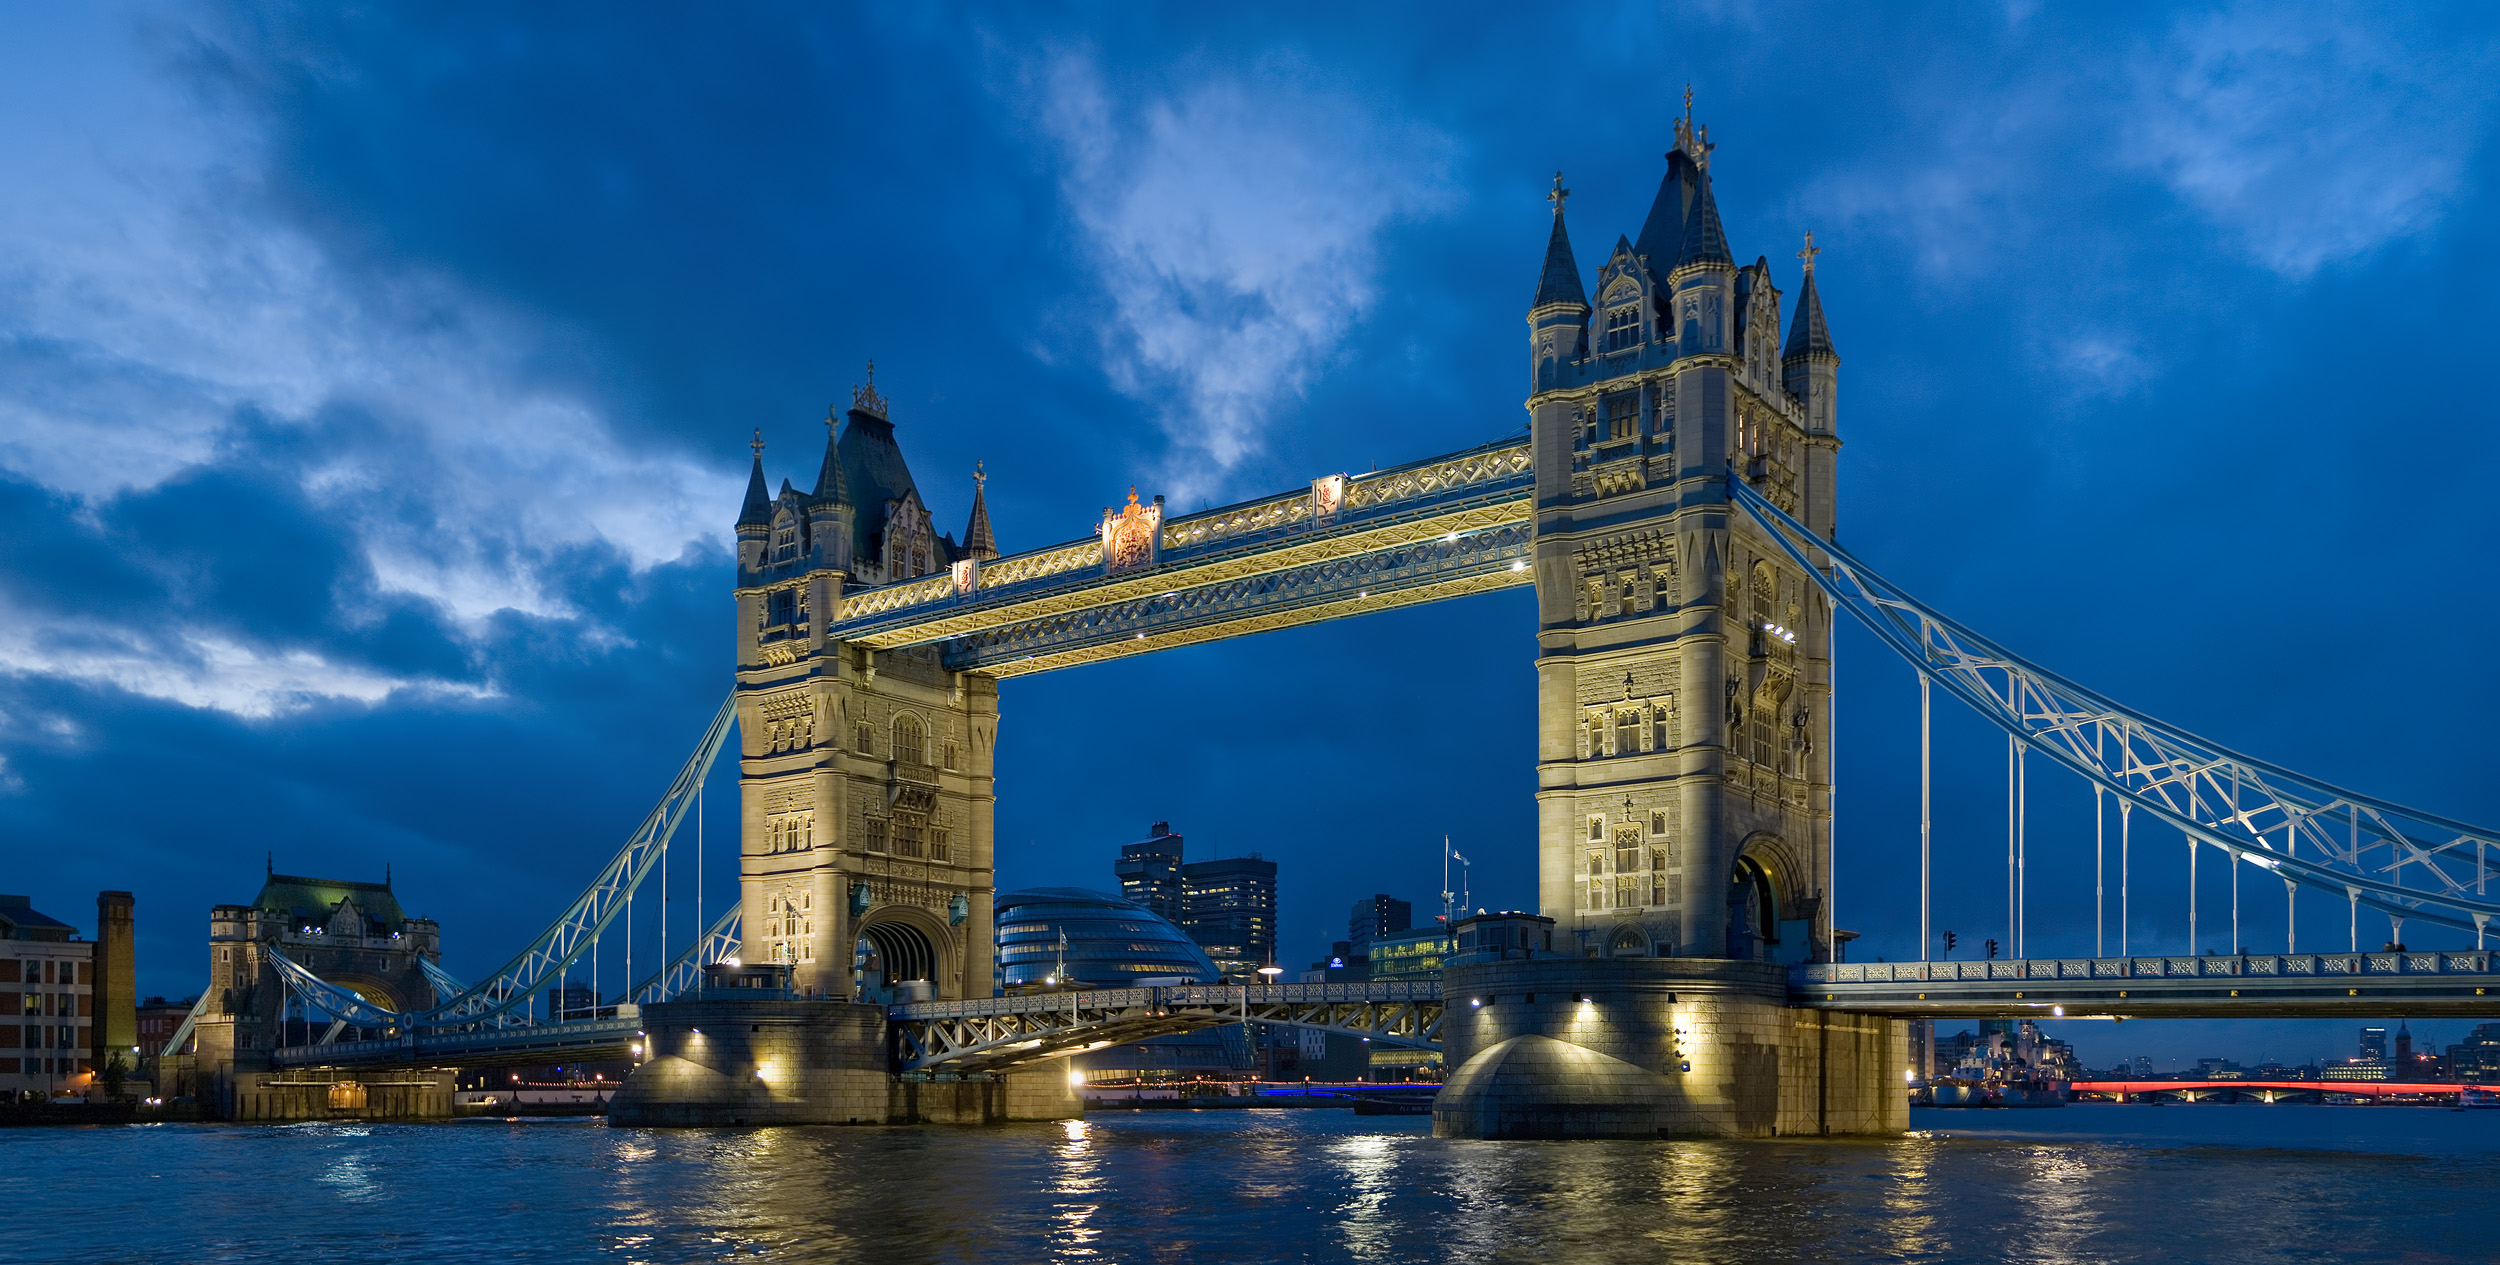 Tower bridge, London, by Diliff - Own work, CC BY-SA 3.0, https://commons.wikimedia.org/w/index.php?curid=1465748